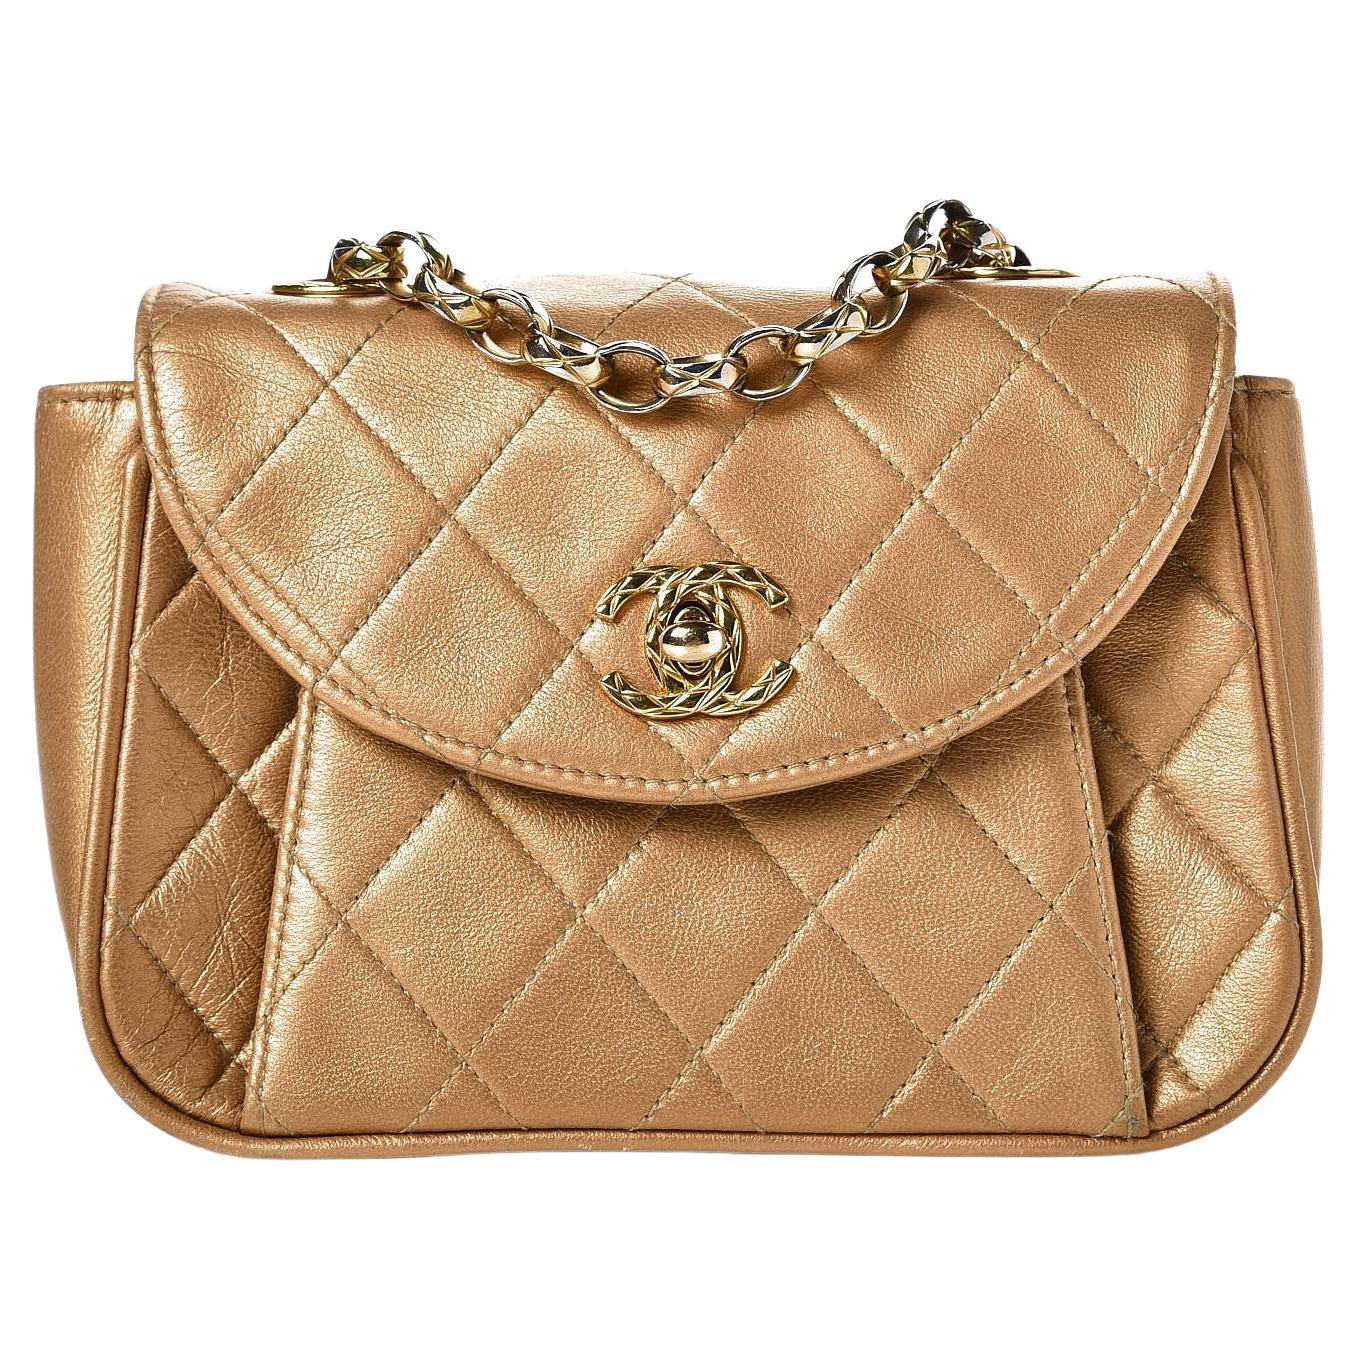 Chanel 1994 Vintage Gold Bronze Metallic Lambskin Mini Quilted Classic Flap Bag